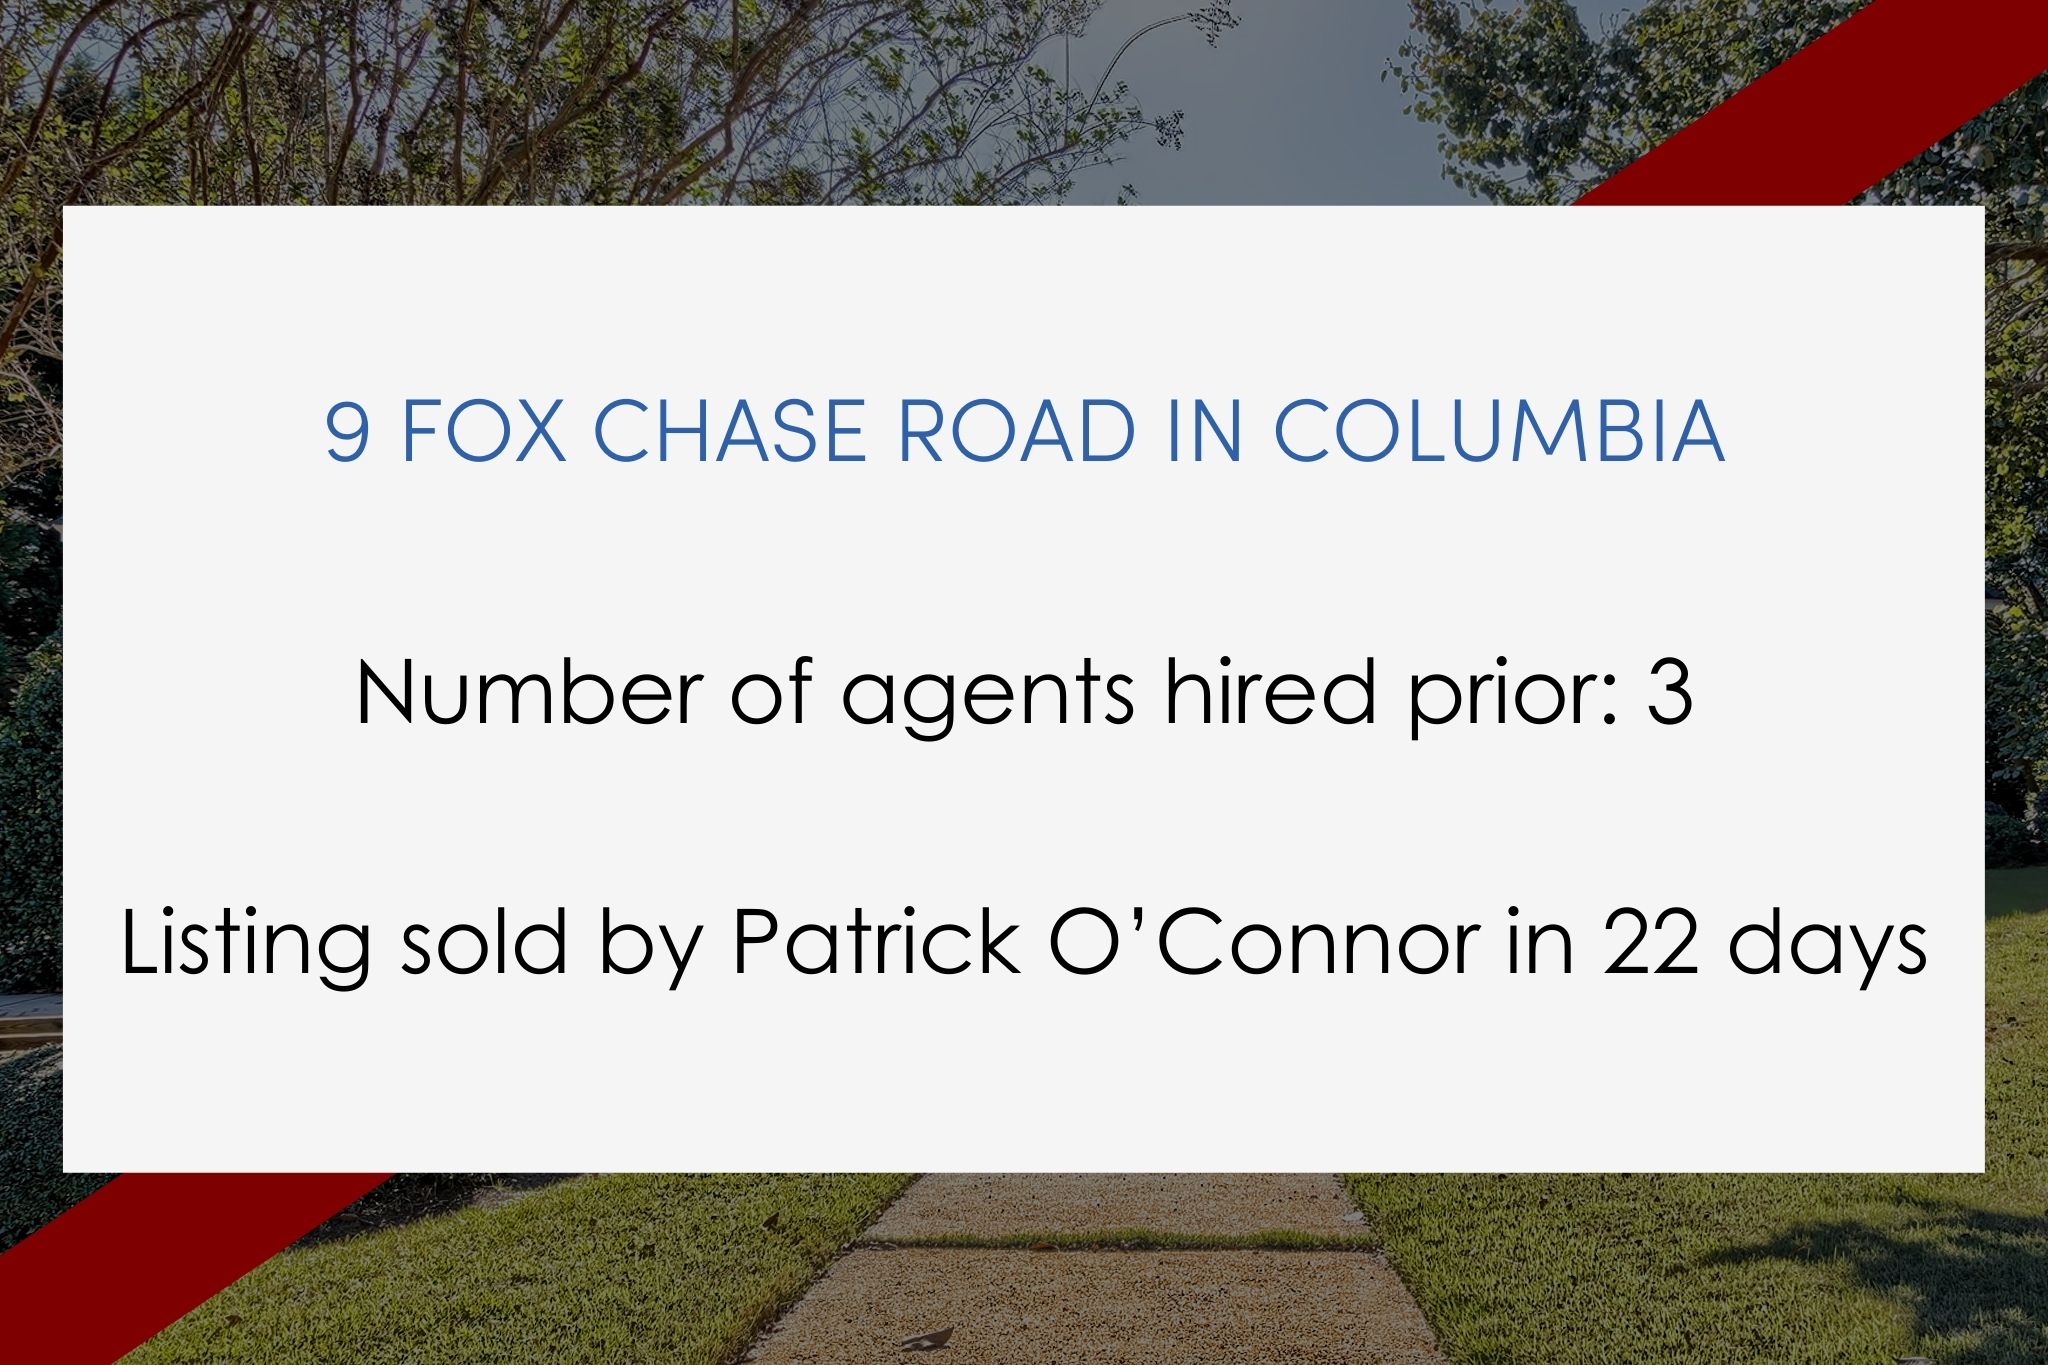 Number of agents hired prior: 3. Listing sold by Patrick O’Connor in 22 days.